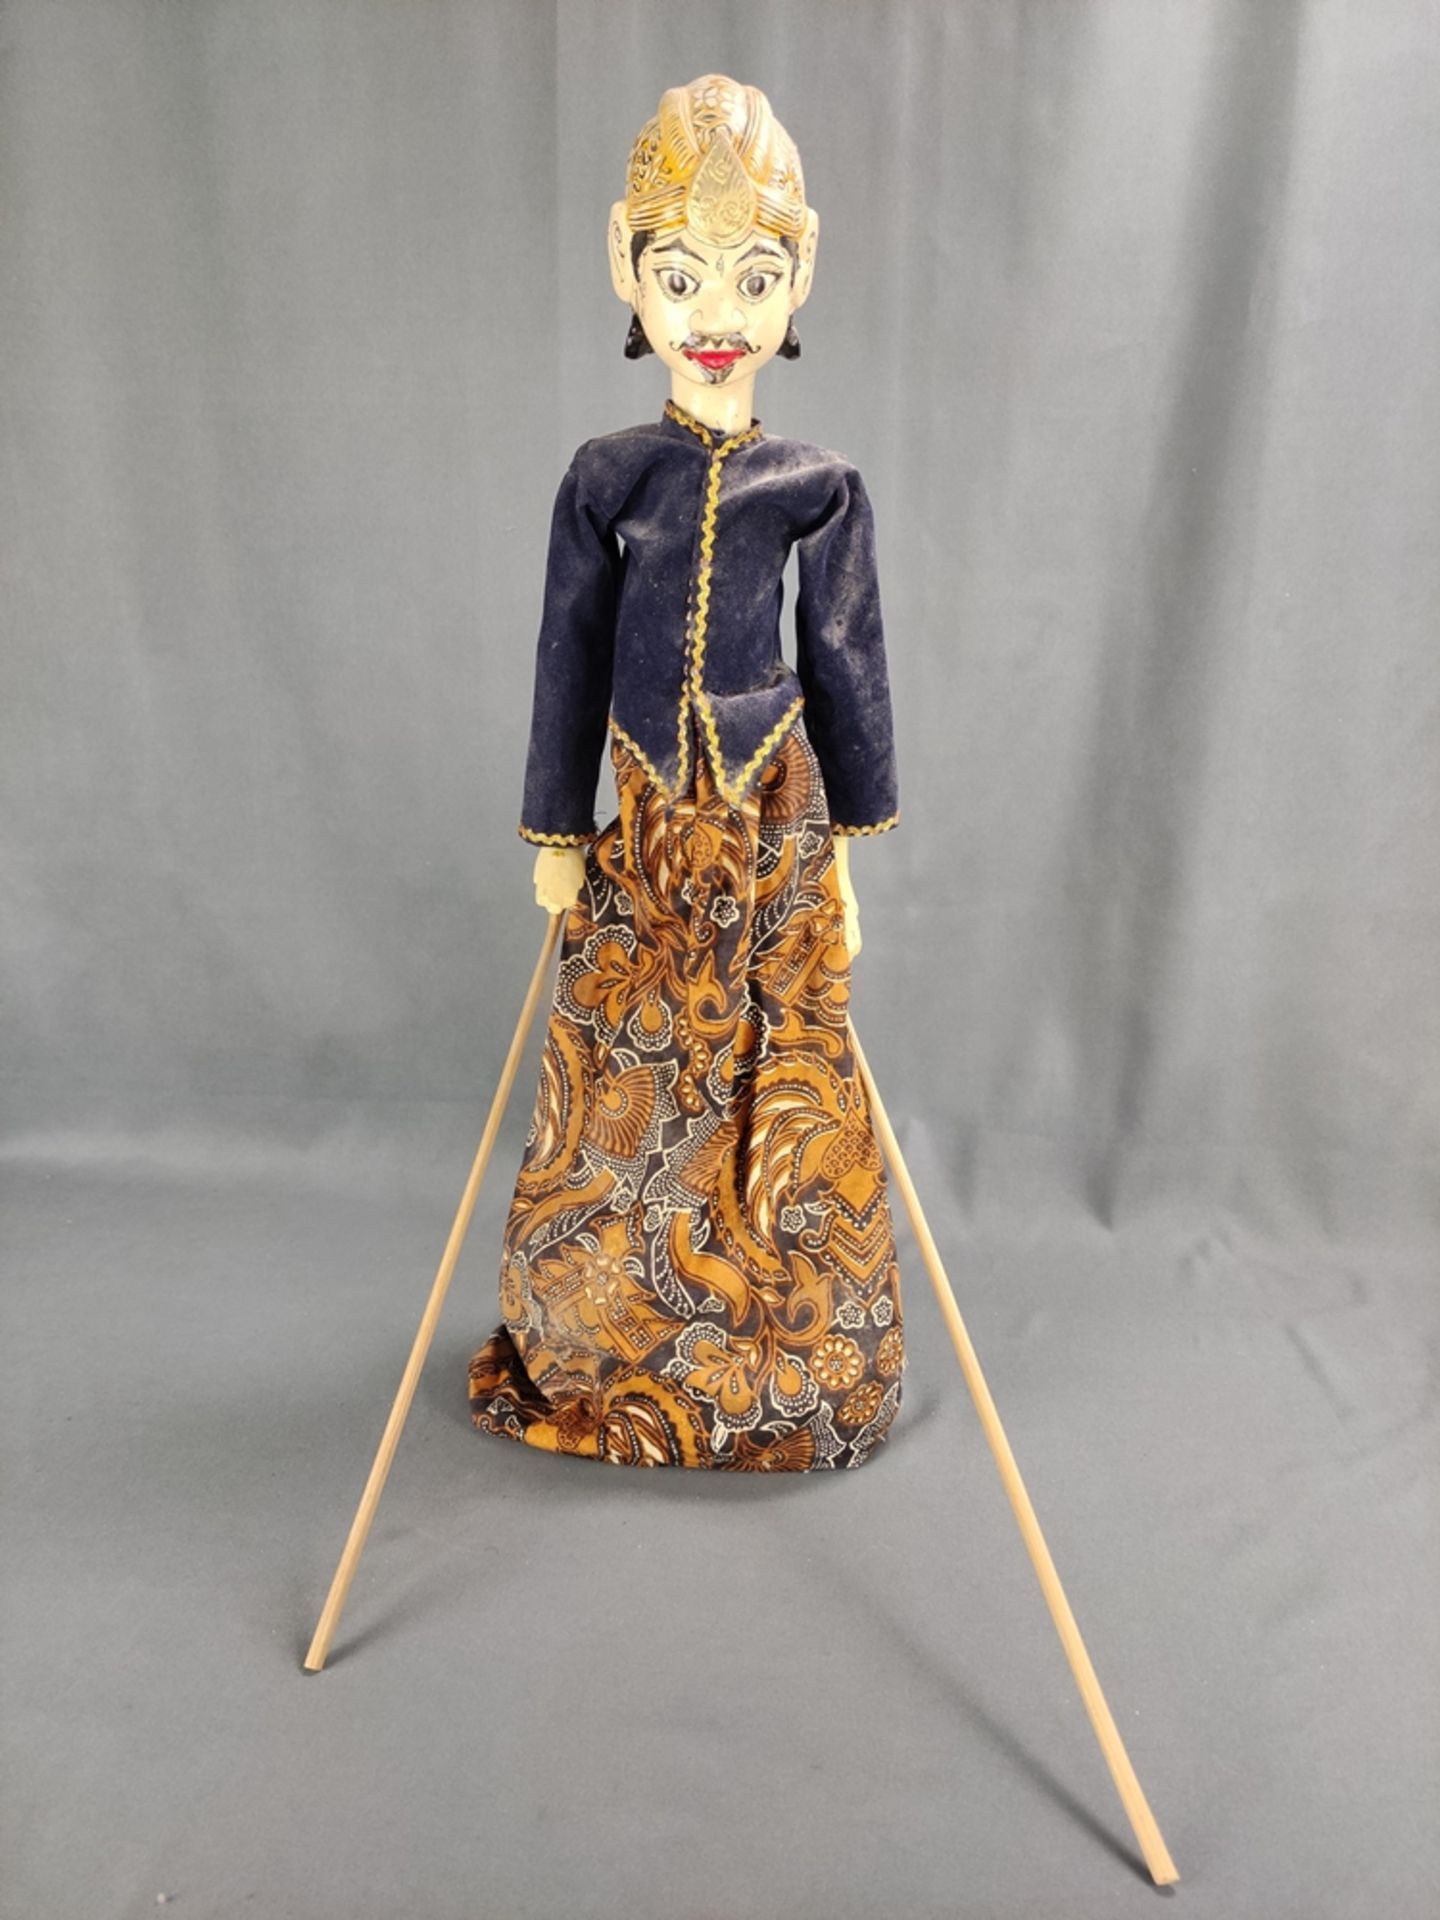 Wayang-Golek doll, Indonesian stick doll, head, torso and arms carved, clothes elaborately